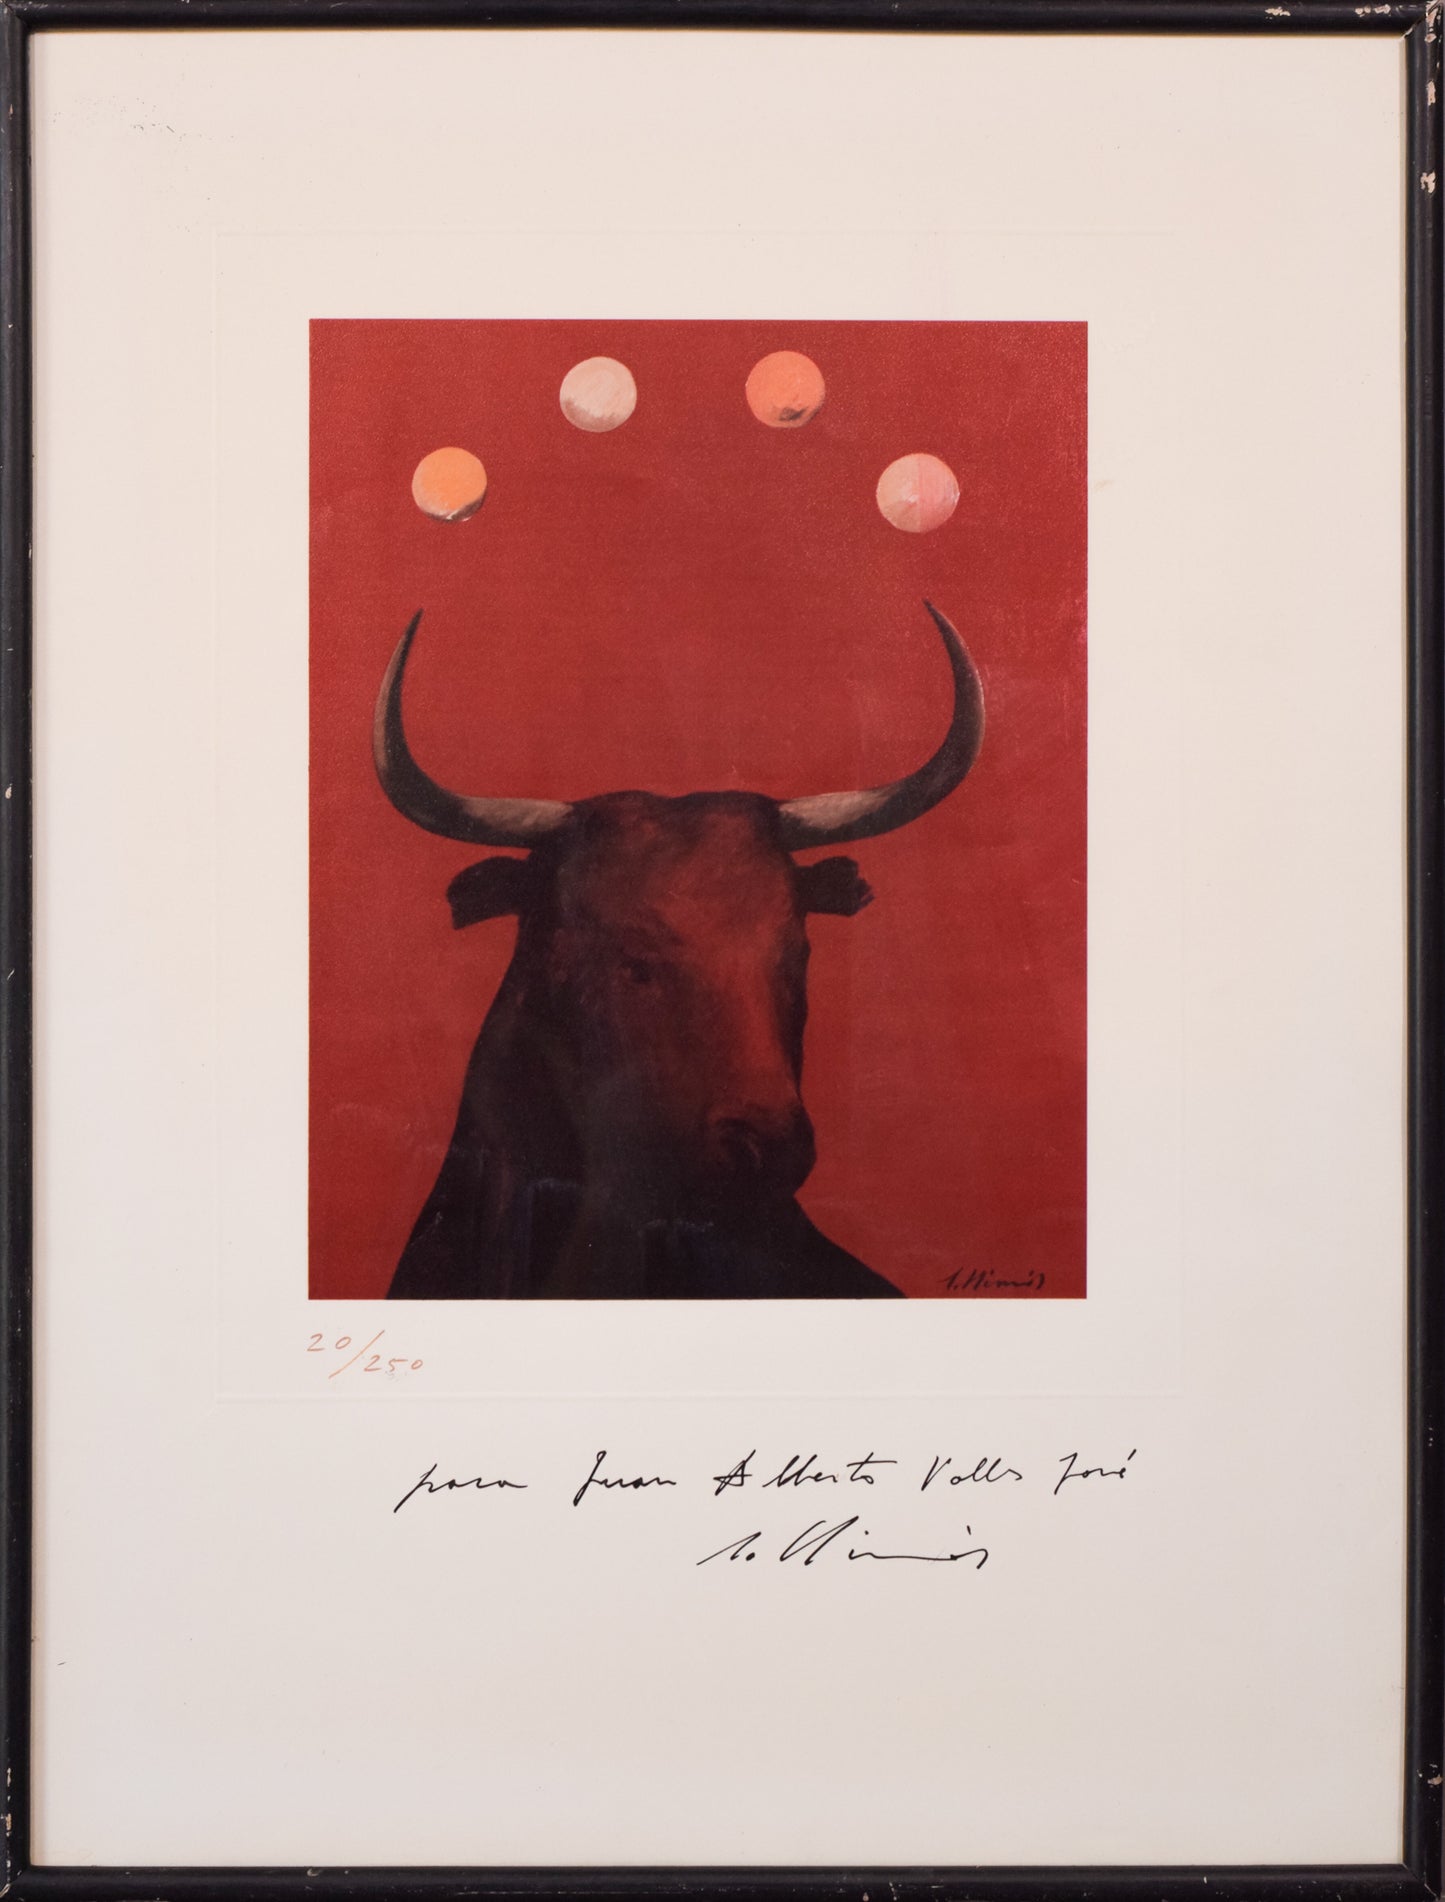 Limited Edition Lithograph of a Bull